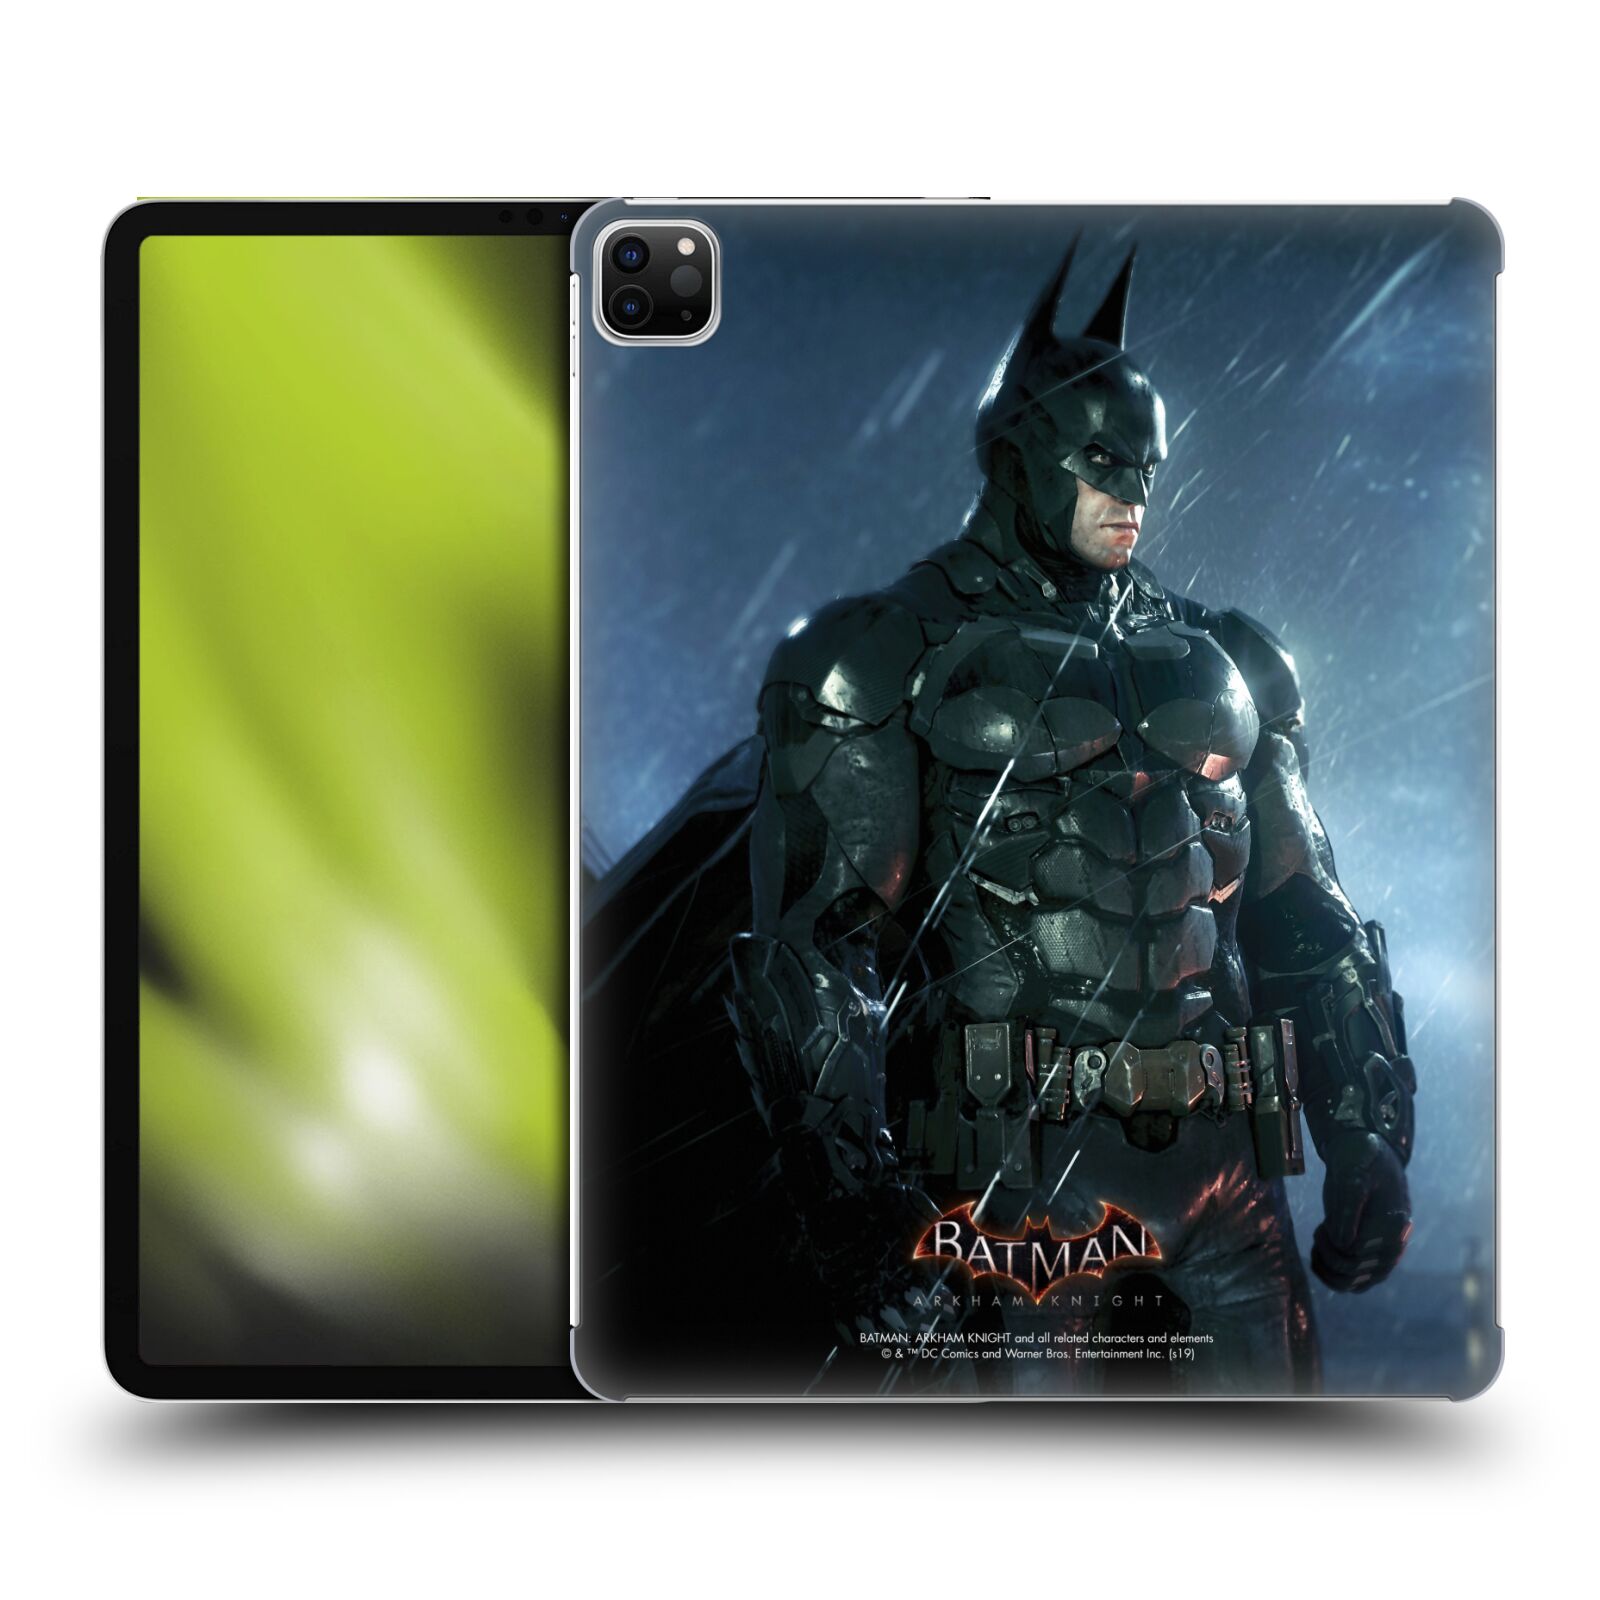 OFFICIAL BATMAN ARKHAM KNIGHT CHARACTERS BACK CASE FOR APPLE iPAD | eBay